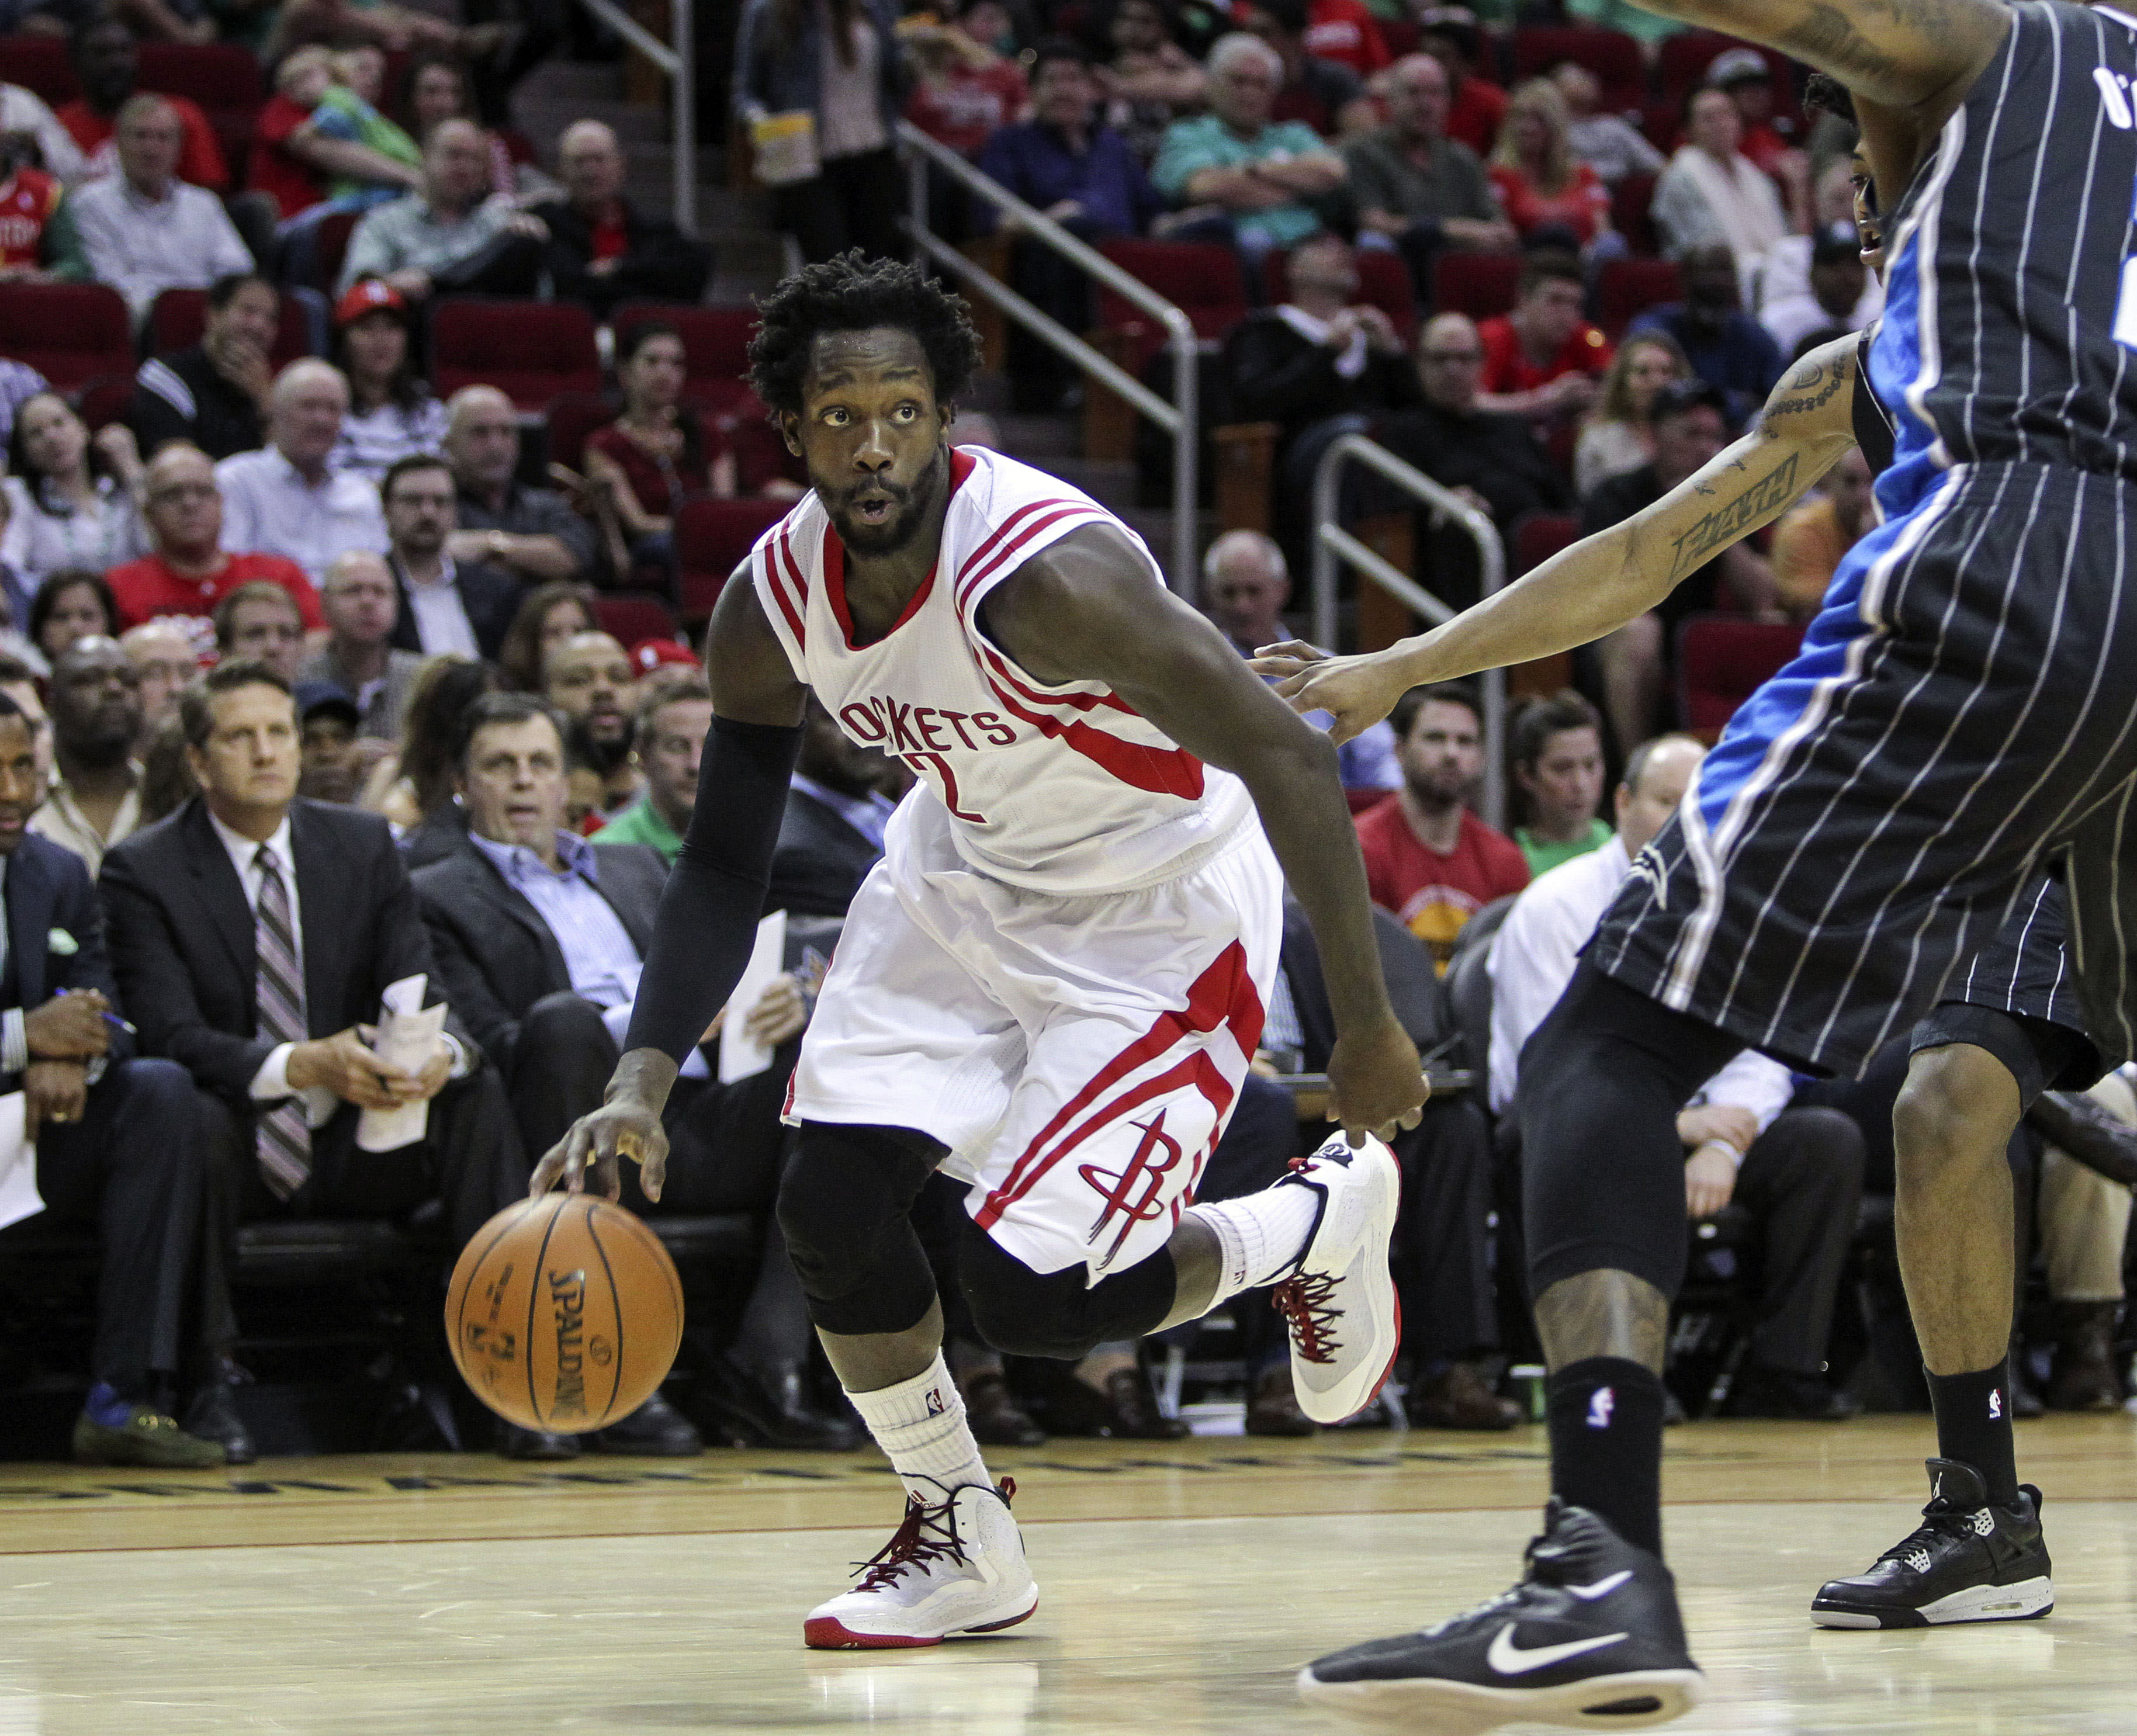 Patrick Beverley is expected to be in a cast for 10 weeks. (USAT)